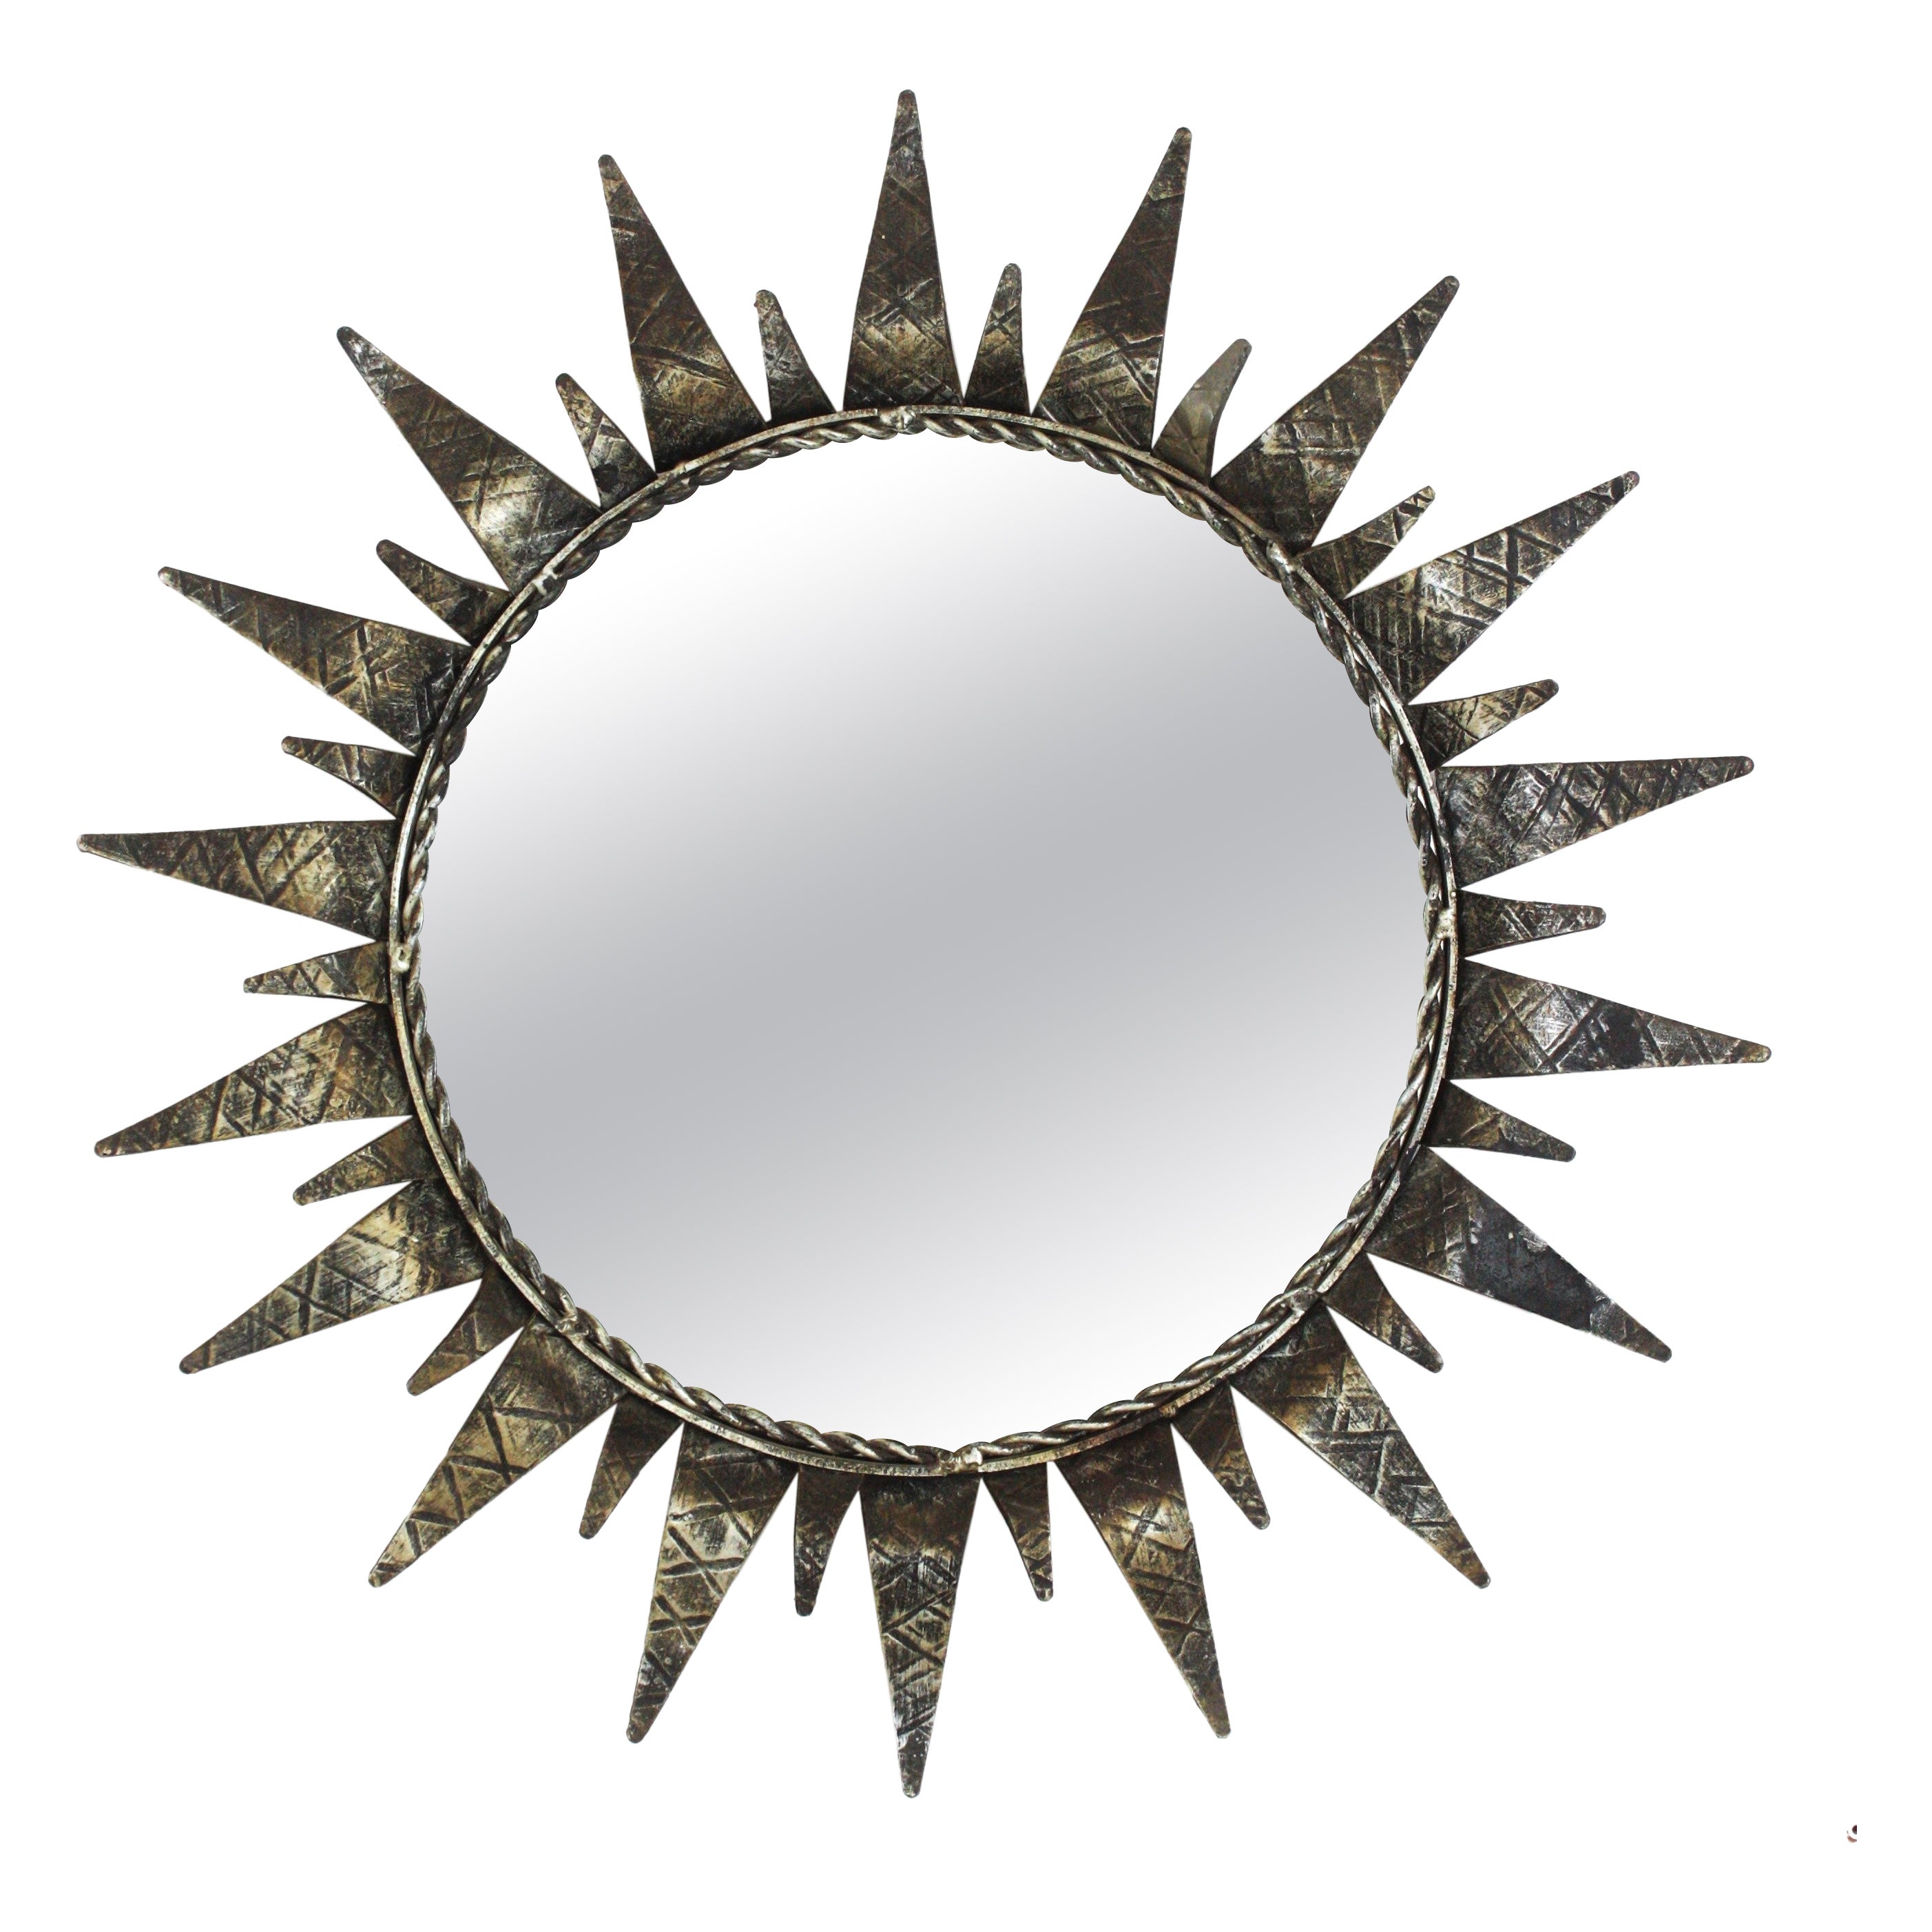 Spanish Sunburst Mirror in Silvered Wrought Iron, 1950s For Sale